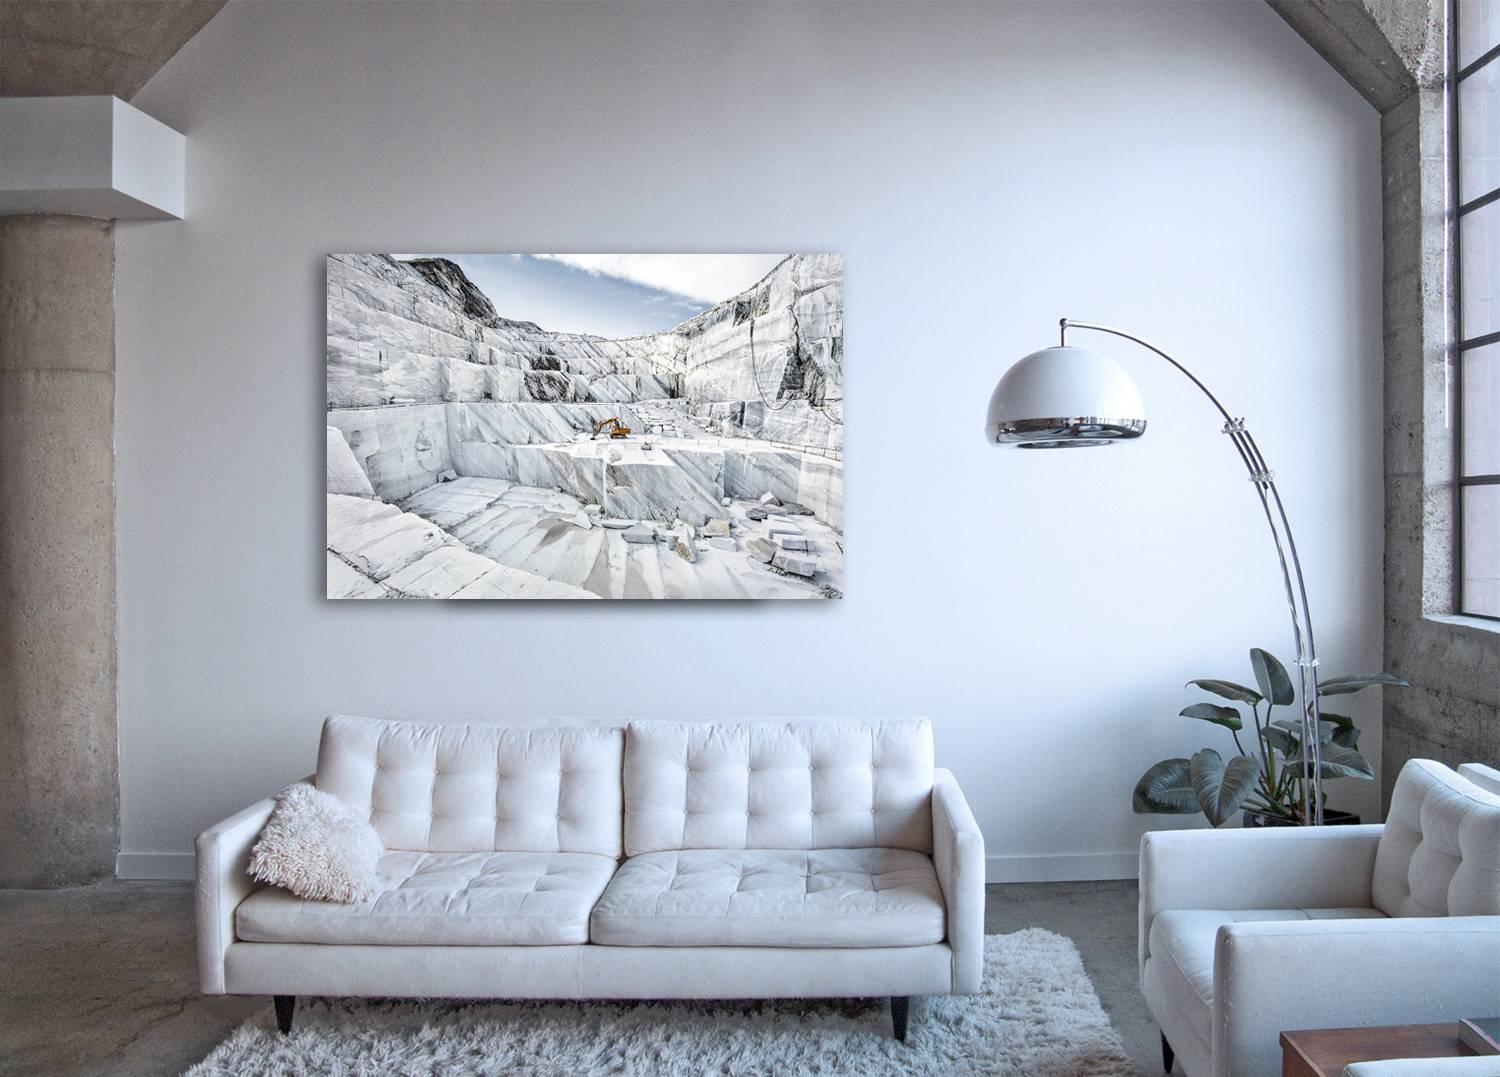 Marmo di Carrara - large format photograph of iconic Italian marble quarry - Photograph by Frank Schott